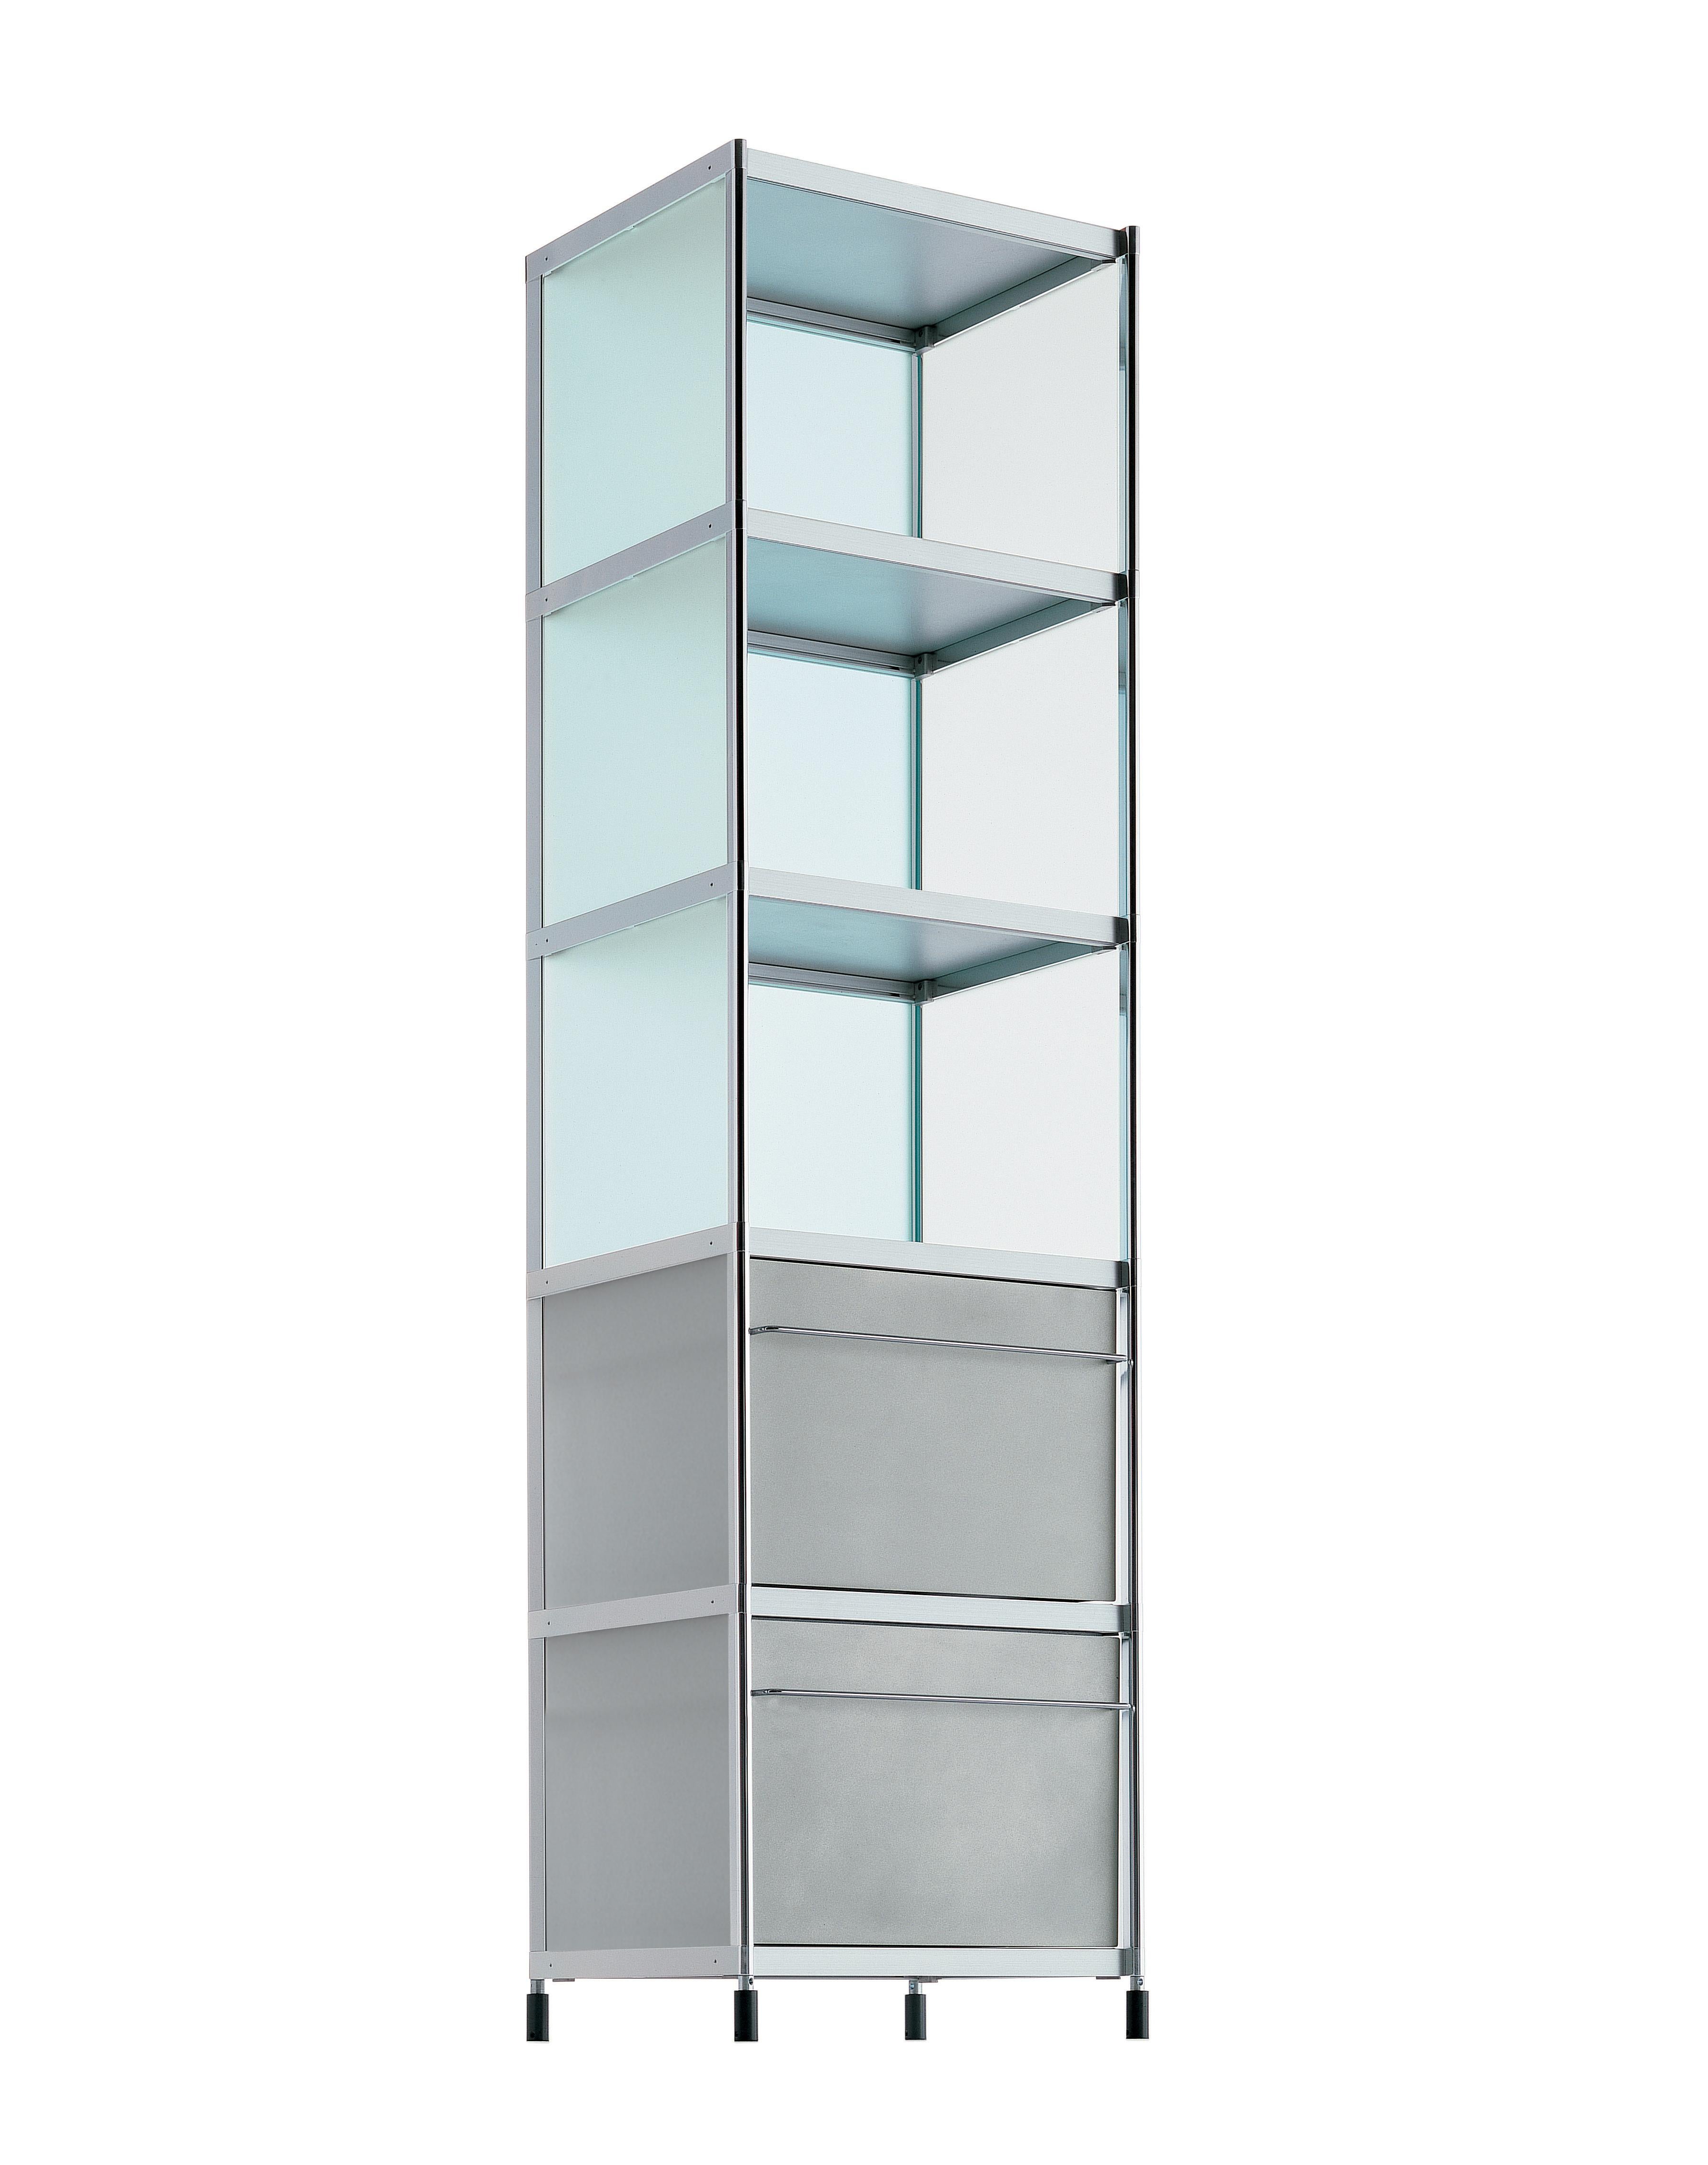 Alias SEC TOR008 Tower Cupboard in Lacquered Aluminum by Alfredo Häberli

Tower with structure in extruded aluminium profiles, 6 shelves and 2 flap doors in stove enamelled metal, lateral panels in methacrylate. Handles and 2 bracket bookends in